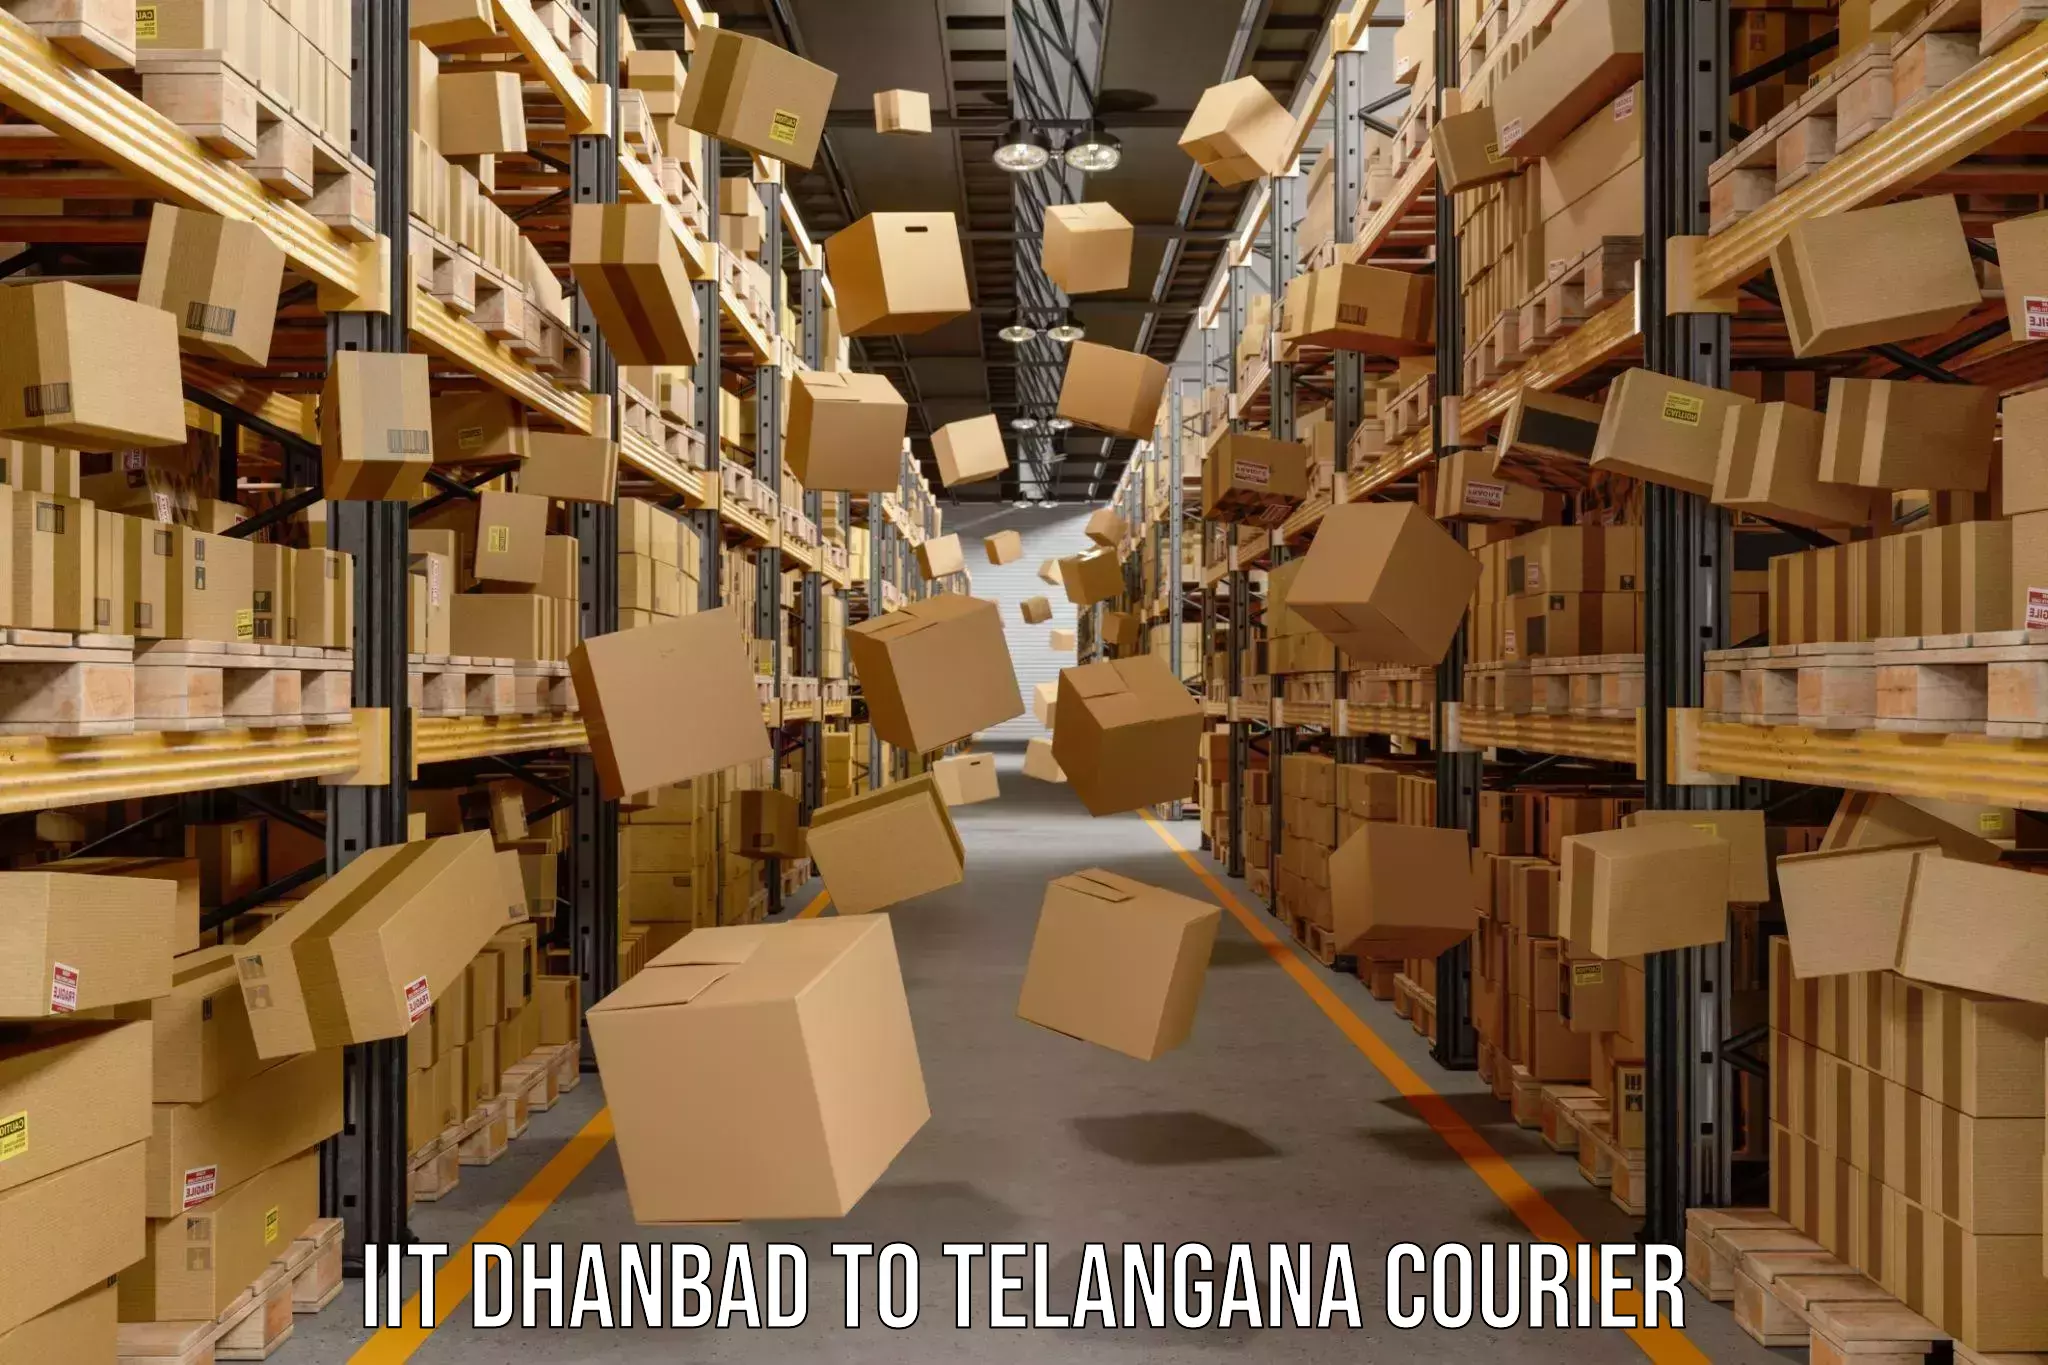 Personal courier services IIT Dhanbad to Sathupally